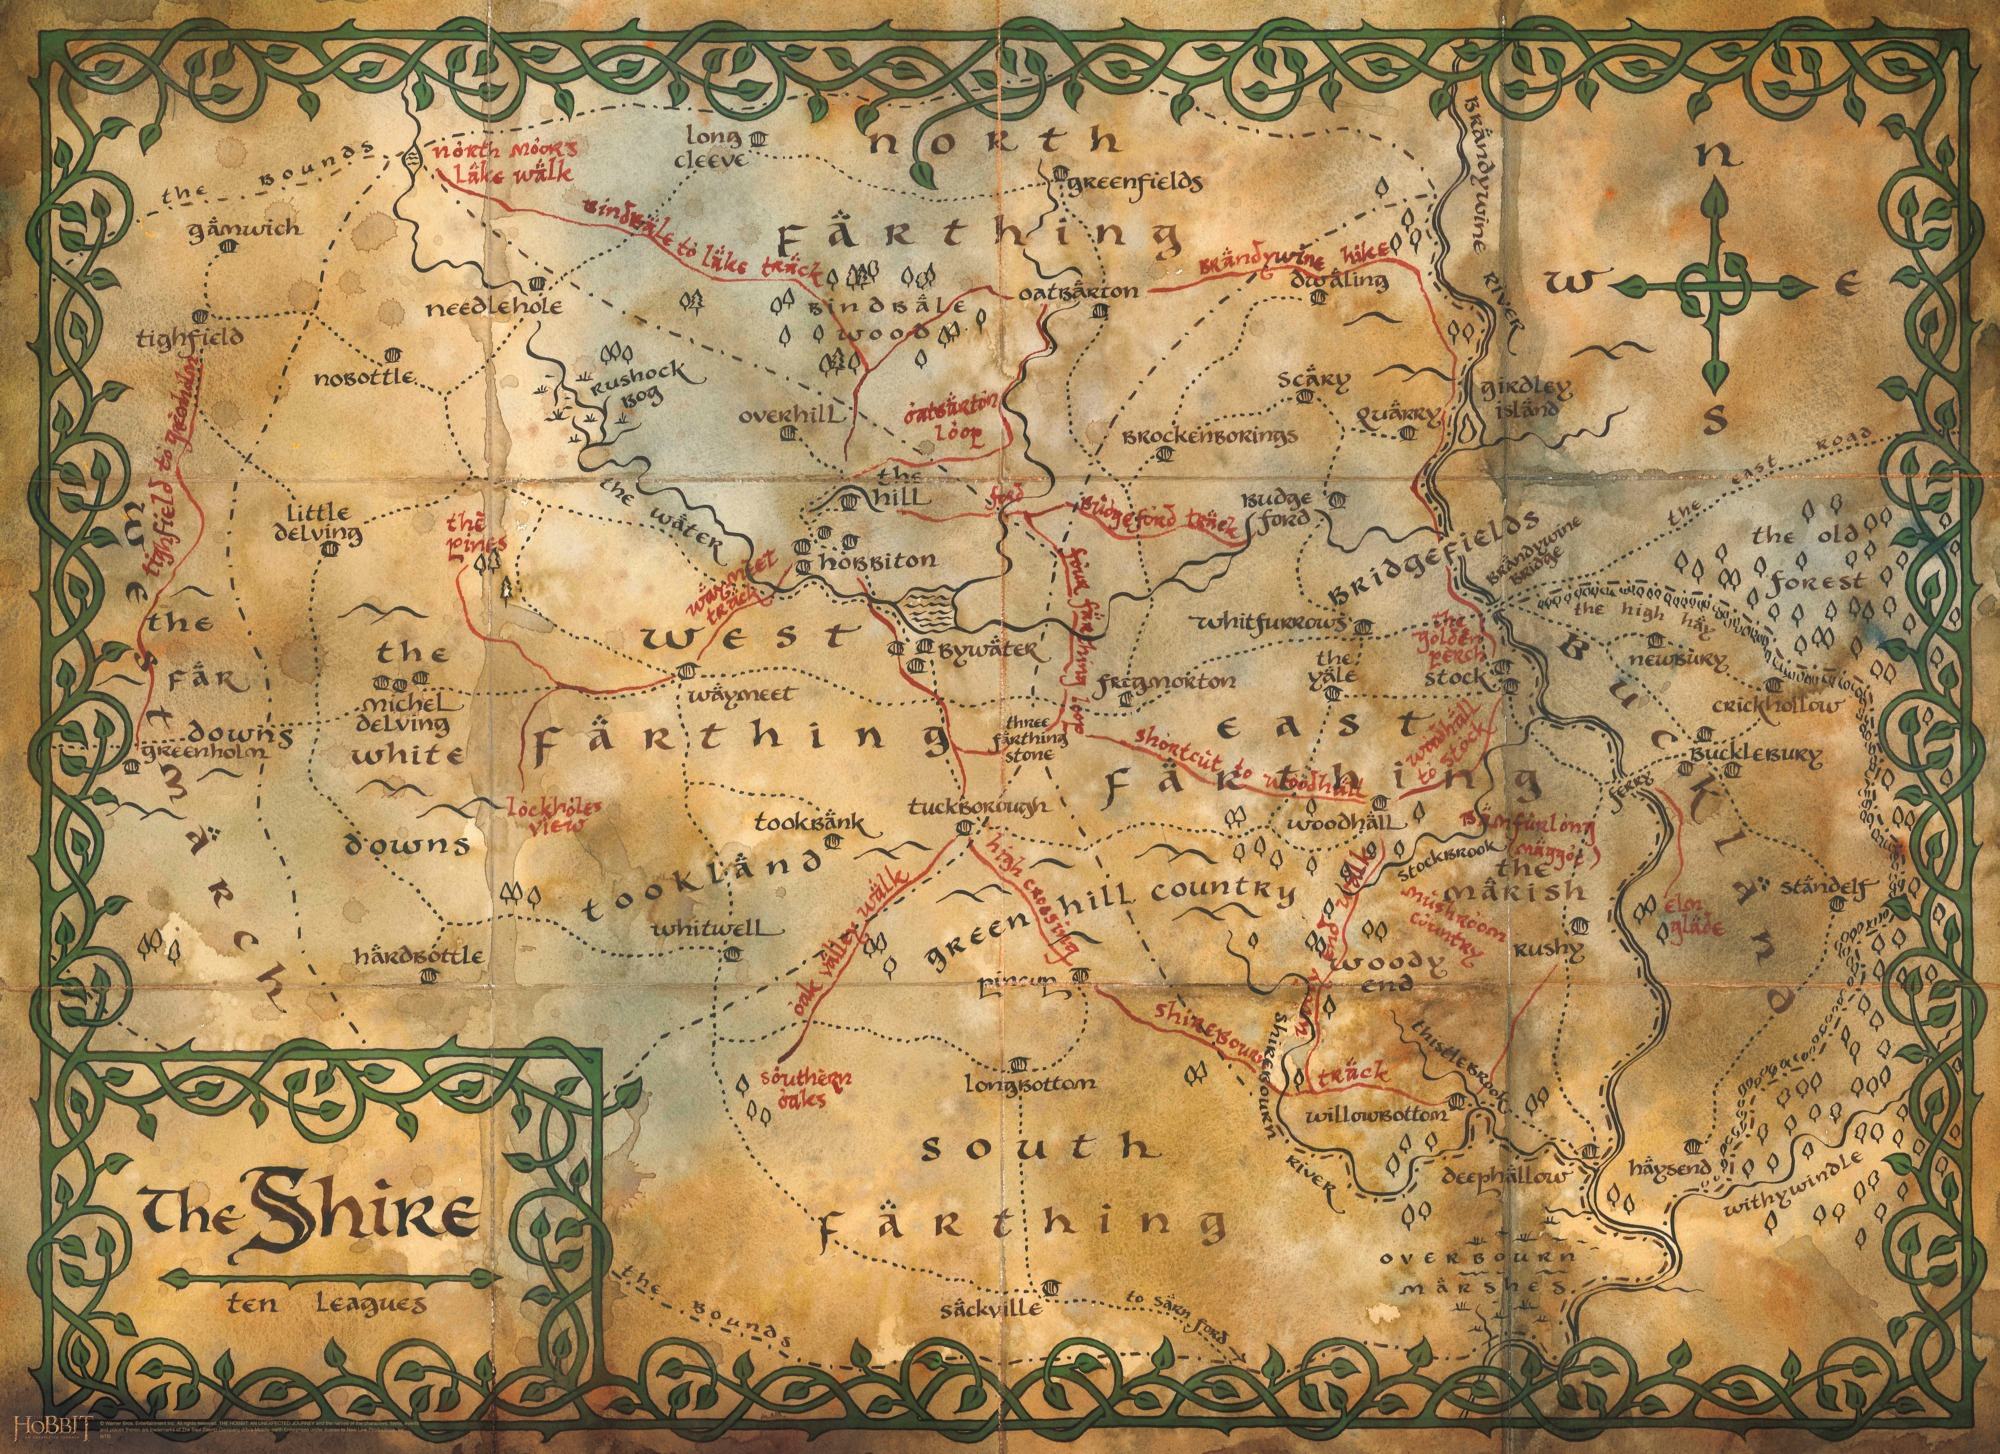 thehobbit-middle-earth-map